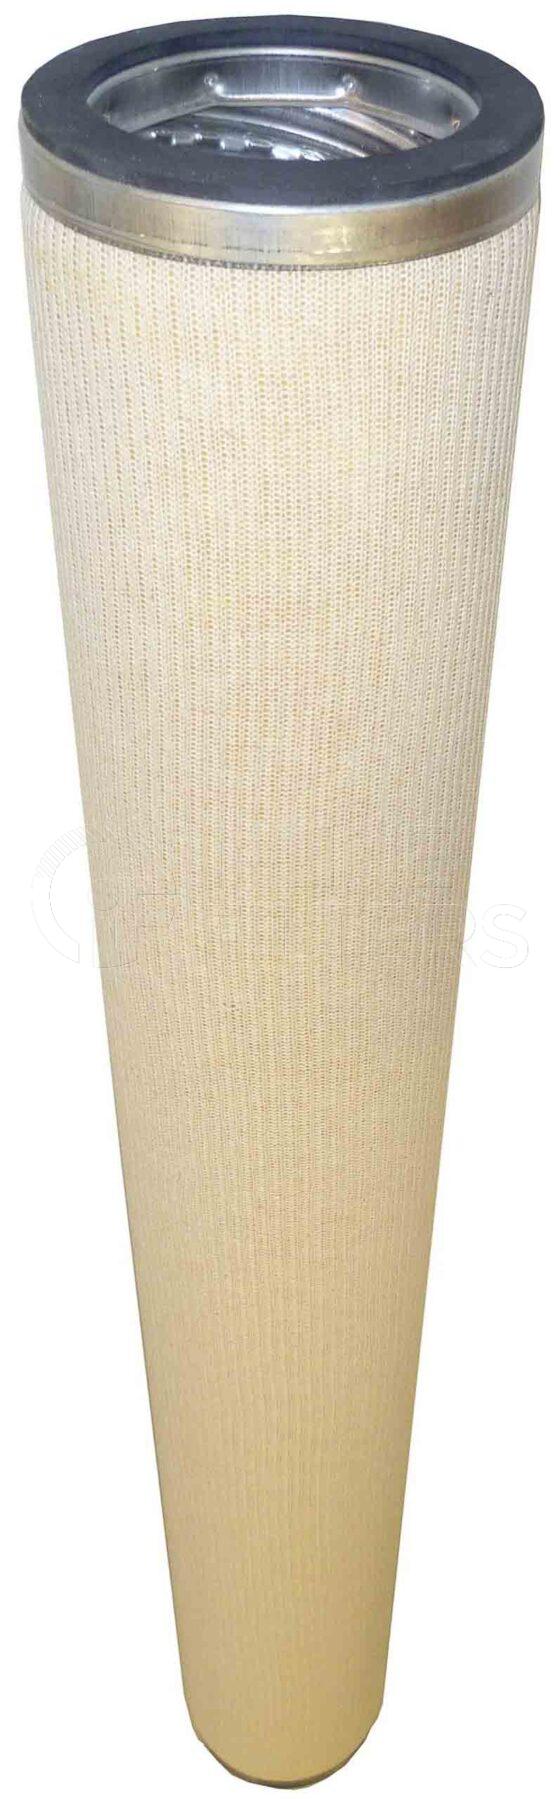 Inline FW90266. Water Filter Product – Cartridge – Round Product Liquid filter